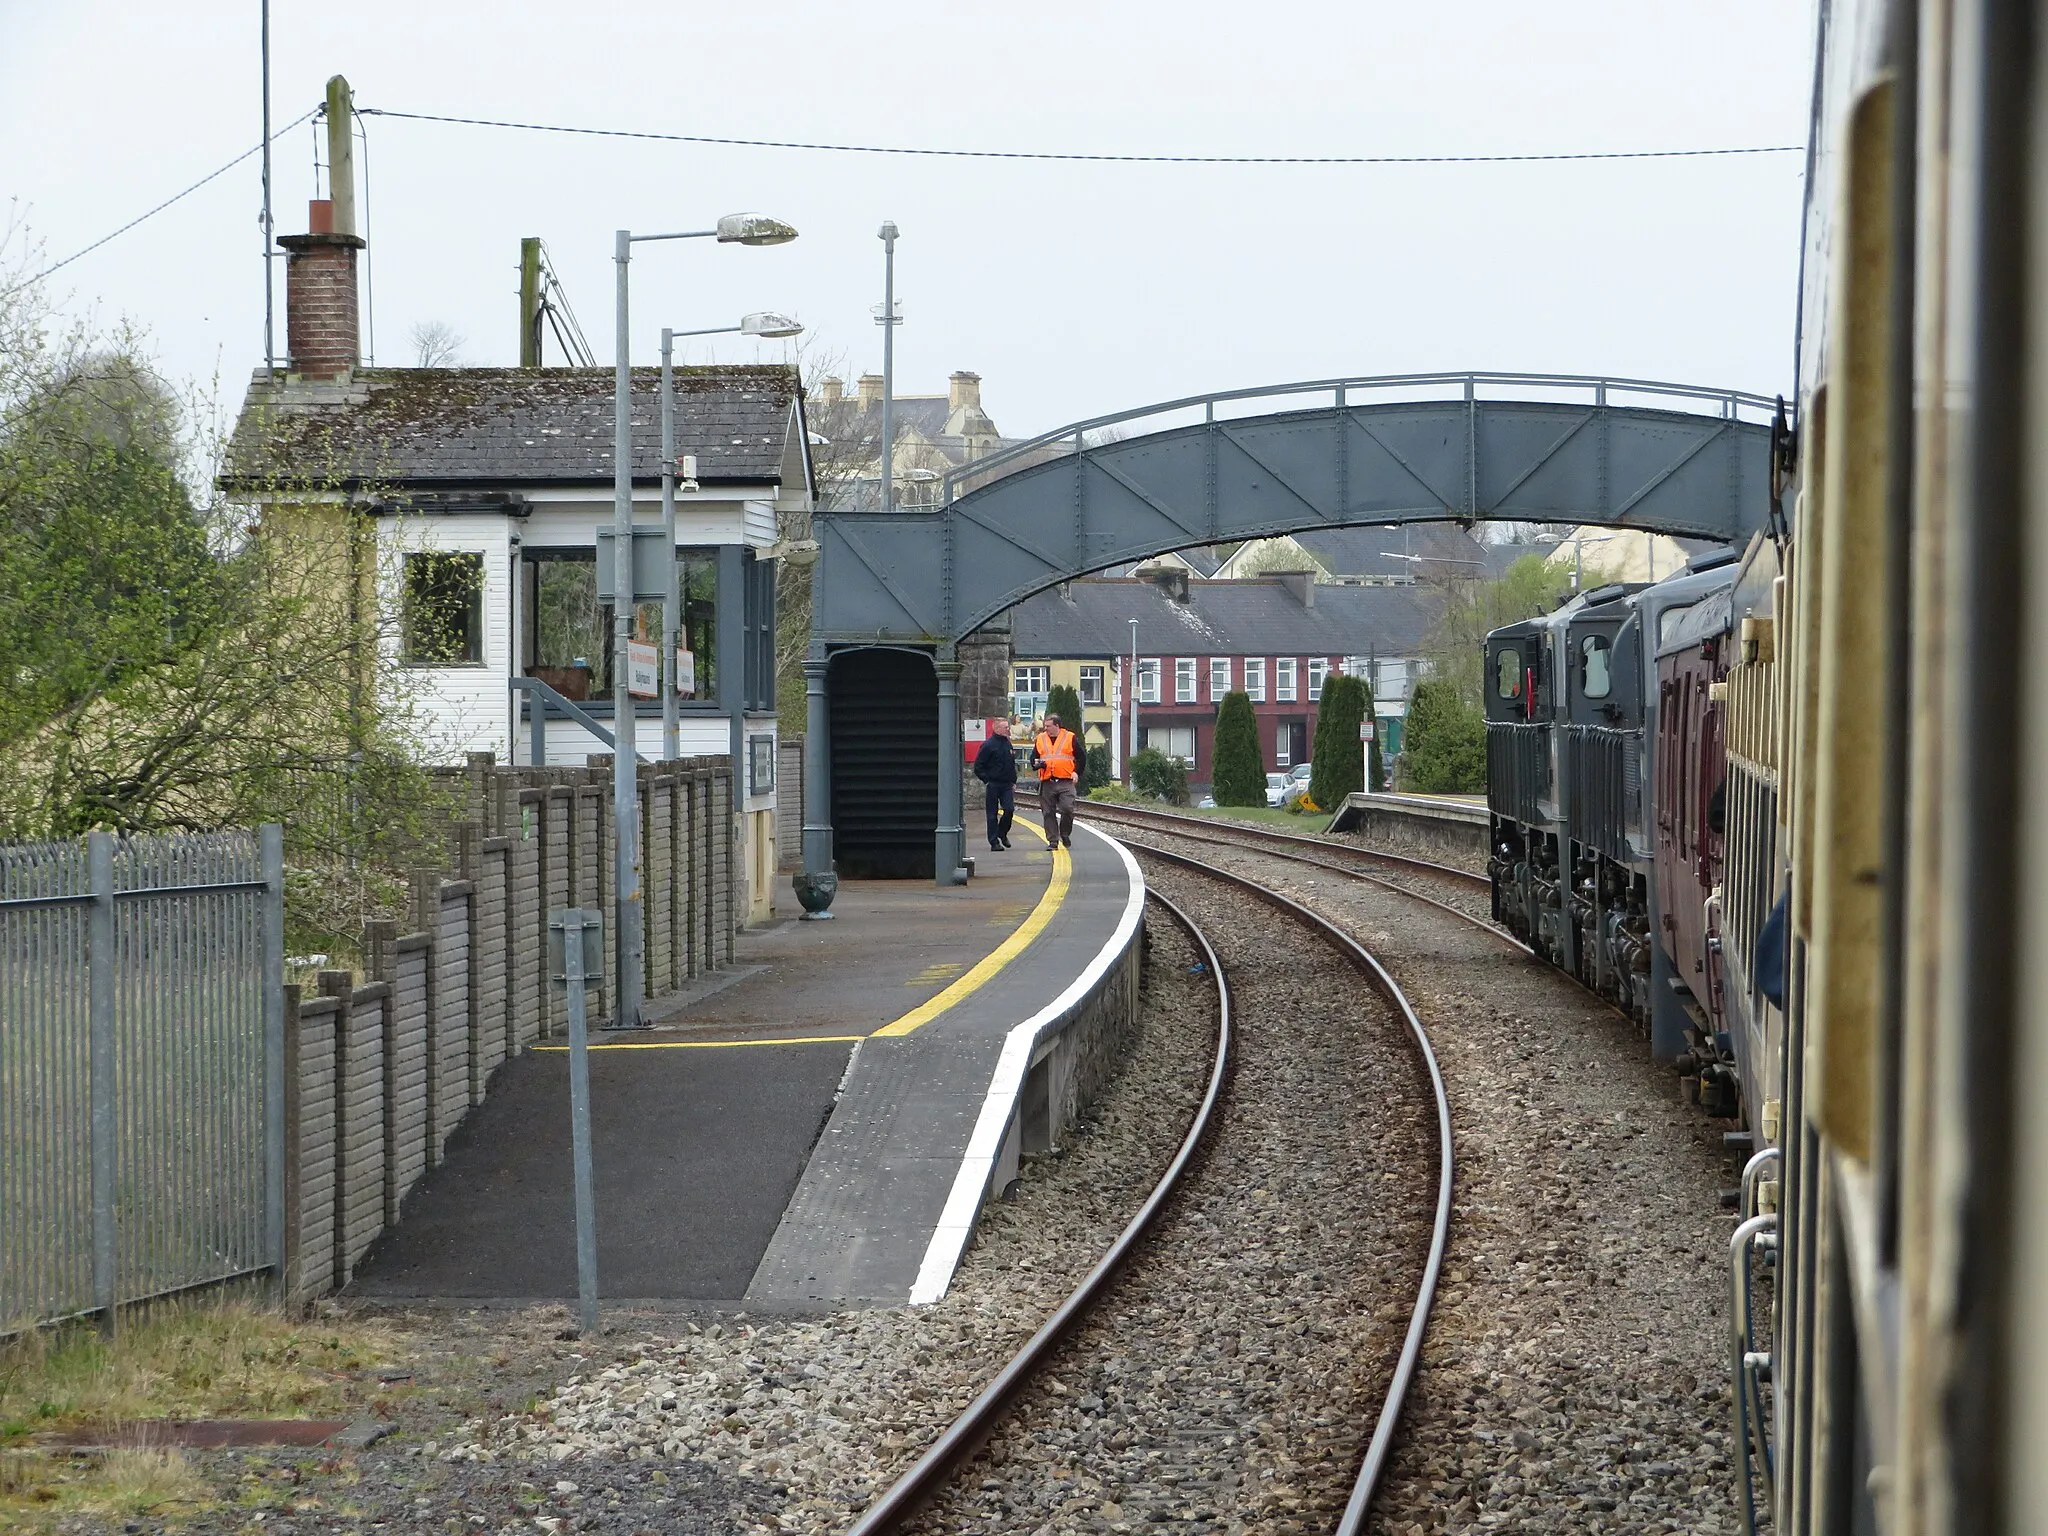 Photo showing: Ballyhaunis station. Ballyhaunis station, seen from the Railway Preservation Society of Ireland's West Awake railtour, with 071 class locomotives No. 075 and No. 082 in charge.